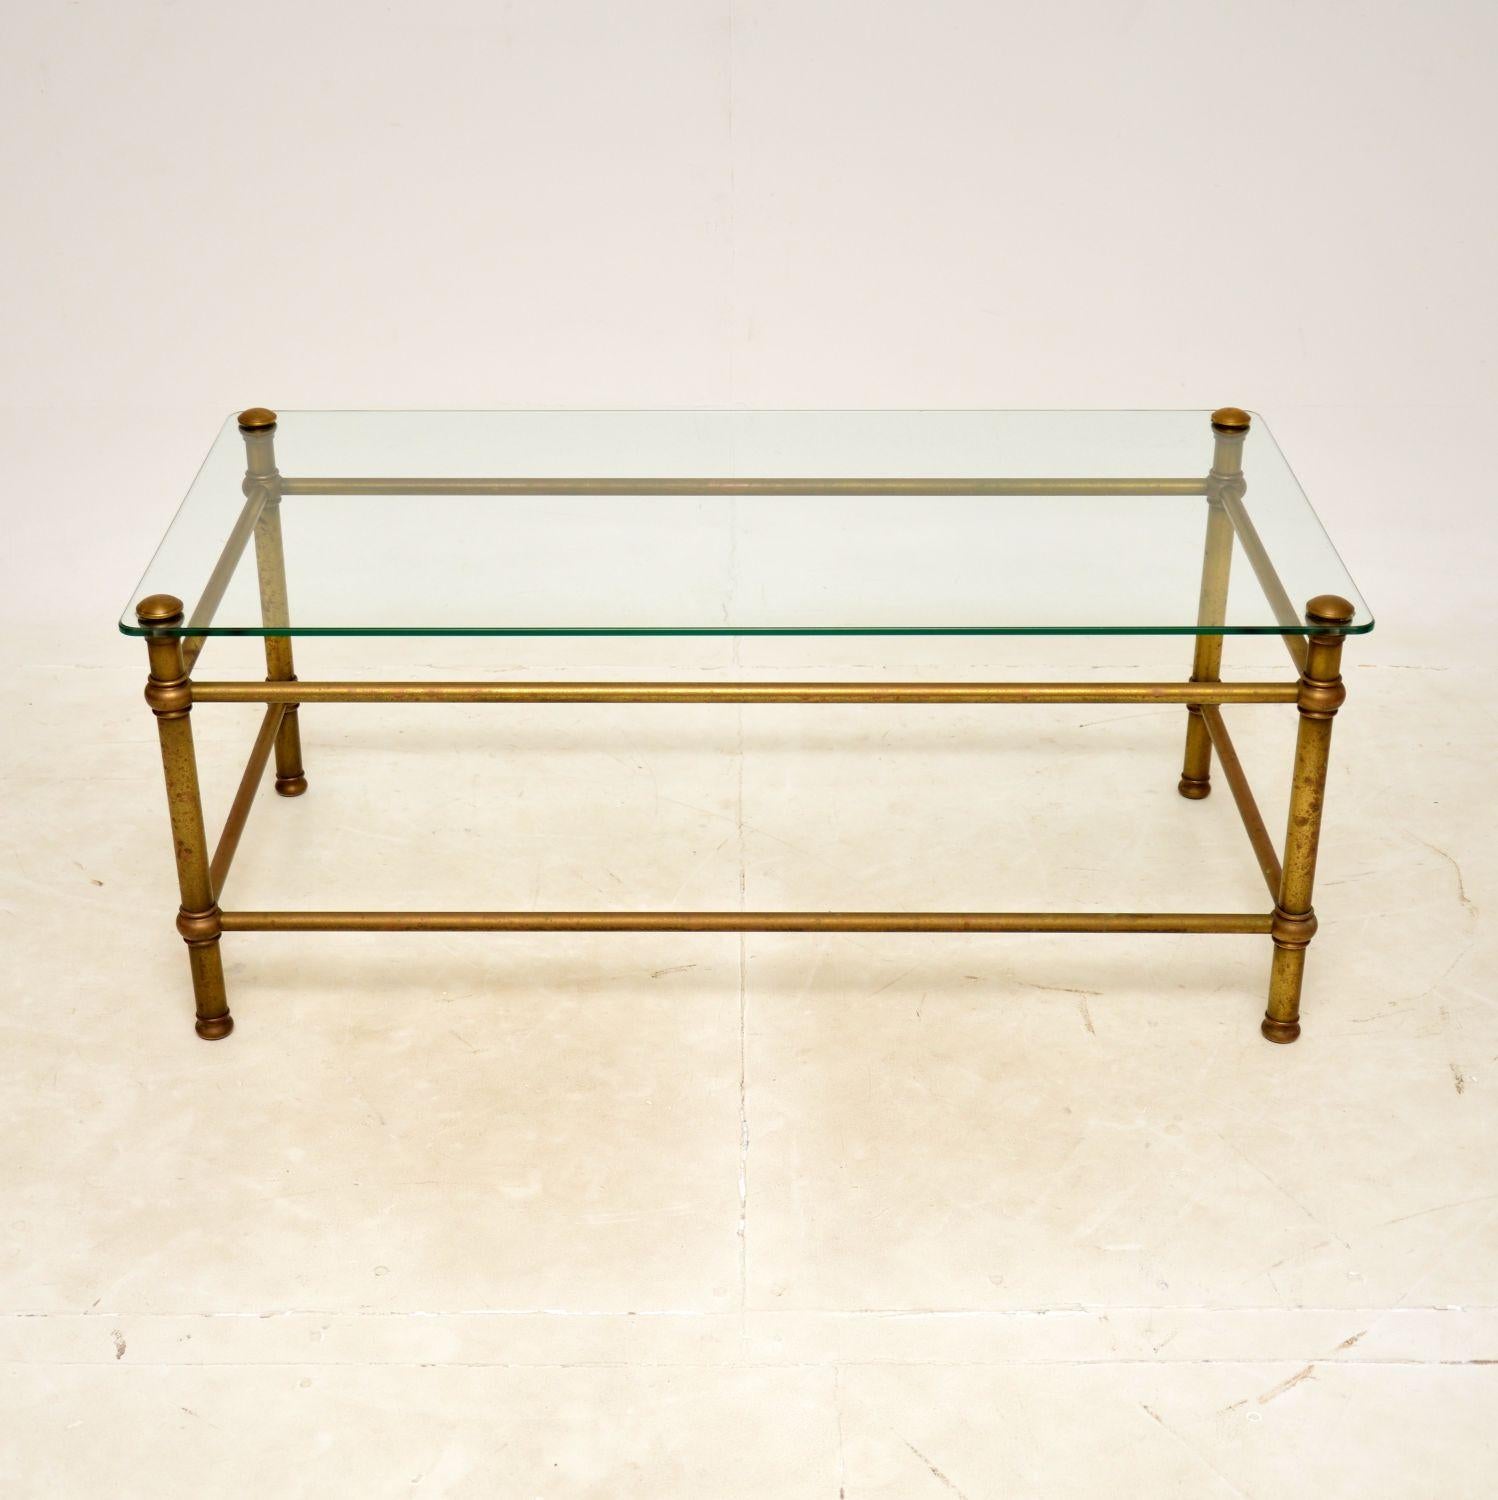 A stylish and very well made vintage brass and glass coffee table, made in England and dating from around the 1970-80’s.

It is of excellent quality, the tubular brass frame has a gorgeous patina and colour tone.

The condition is very good for its